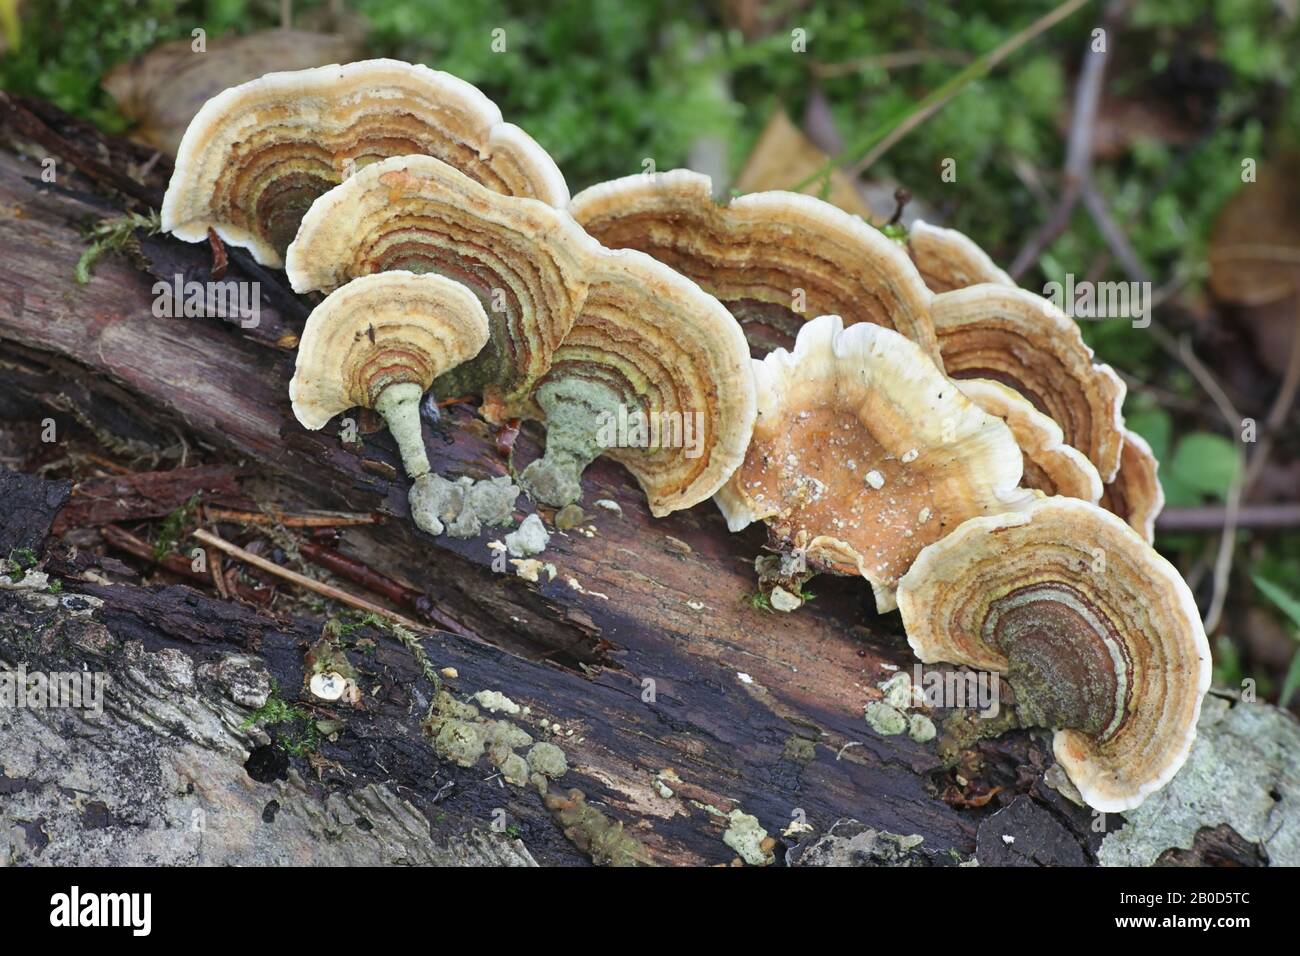 Stereum subtomentosum, known as the Yellowing Curtain Crust, wild fungus from Finland Stock Photo